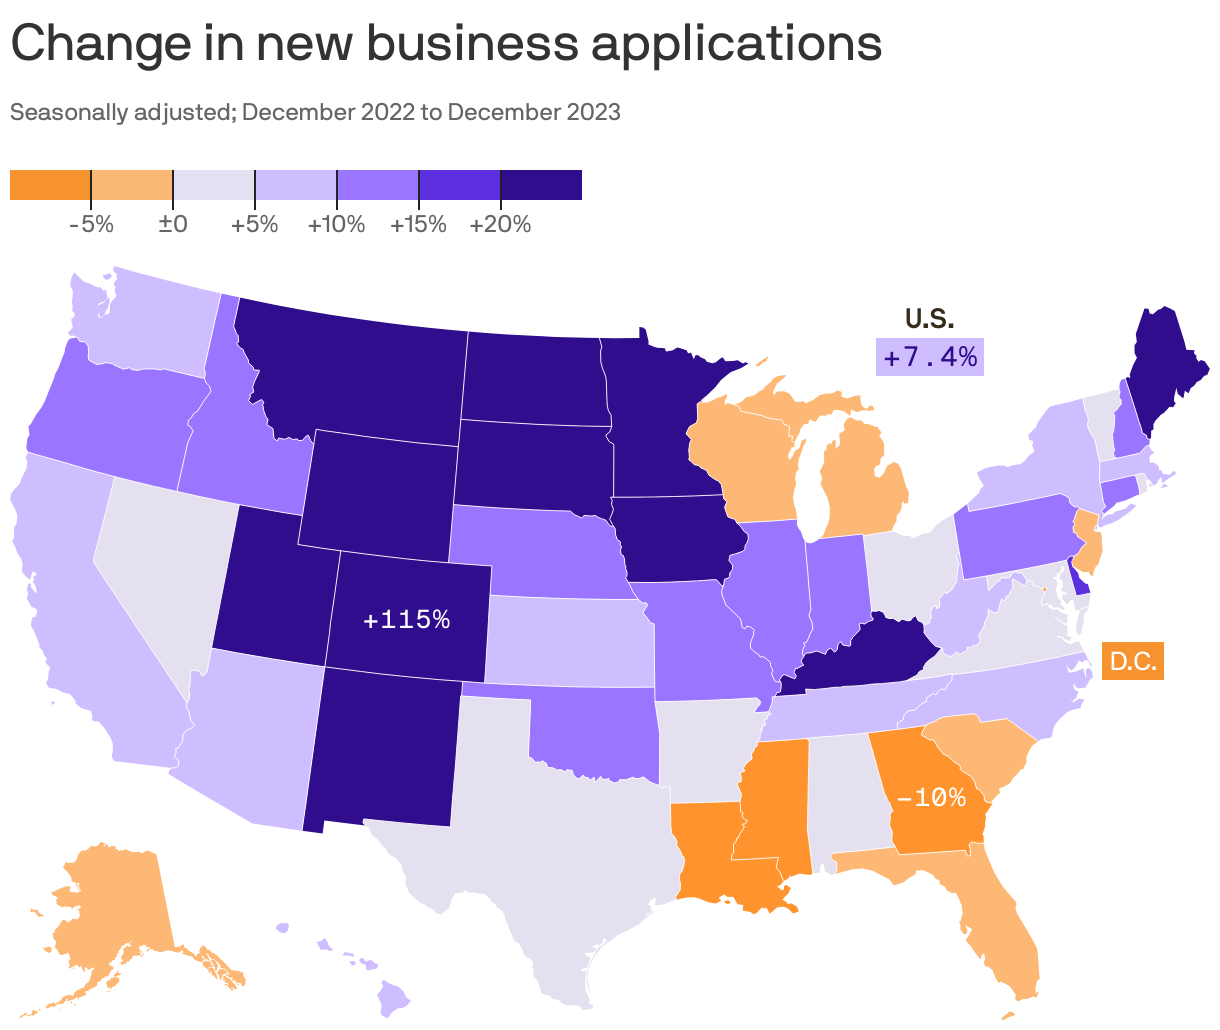 Change in new business applications